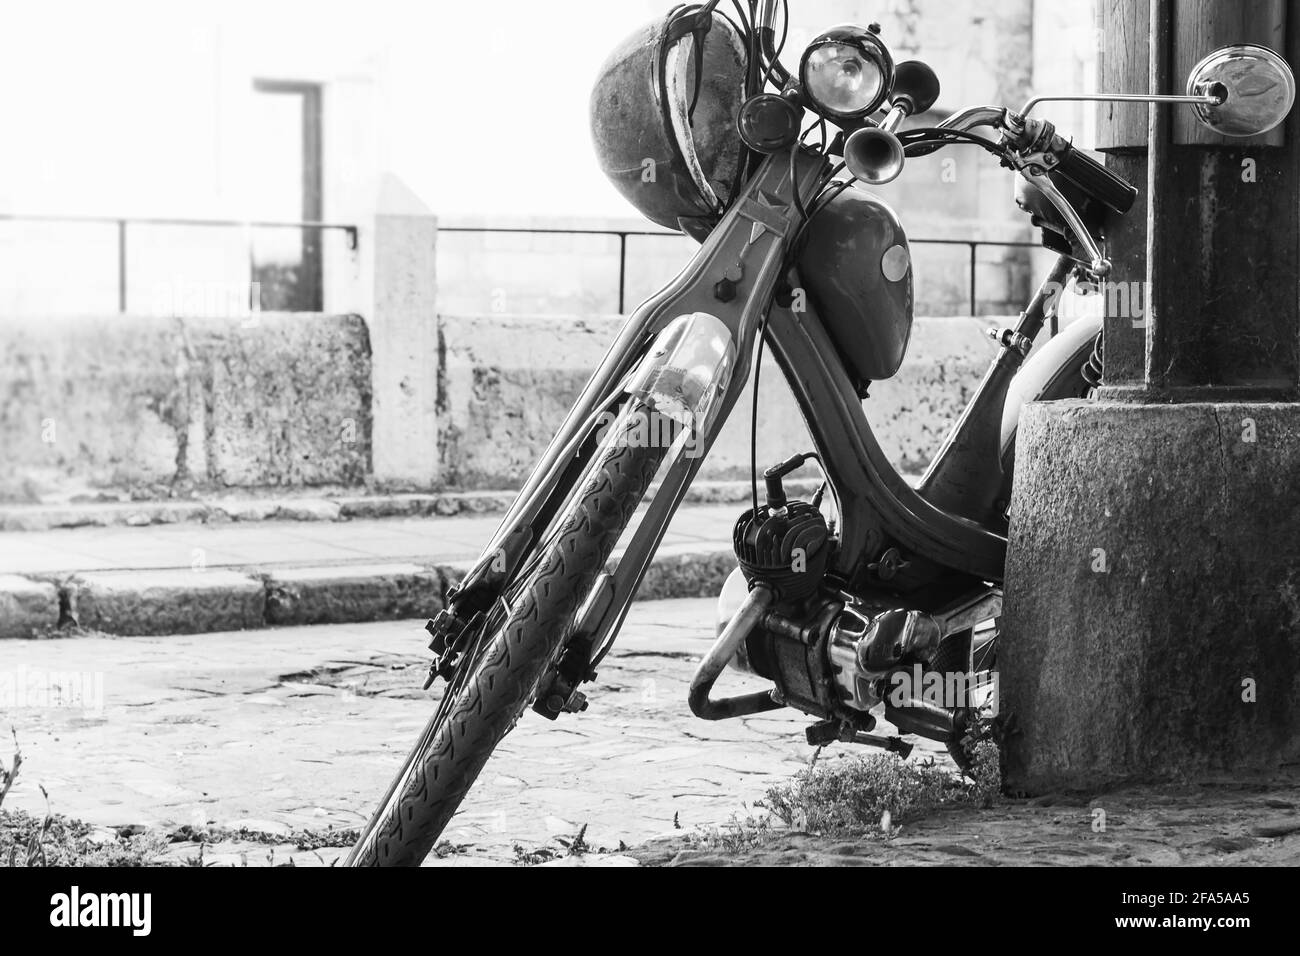 Motorcycle and old town on a street in Castilla y Leon.The photograph is in black and white and is taken in horizontal format. Stock Photo